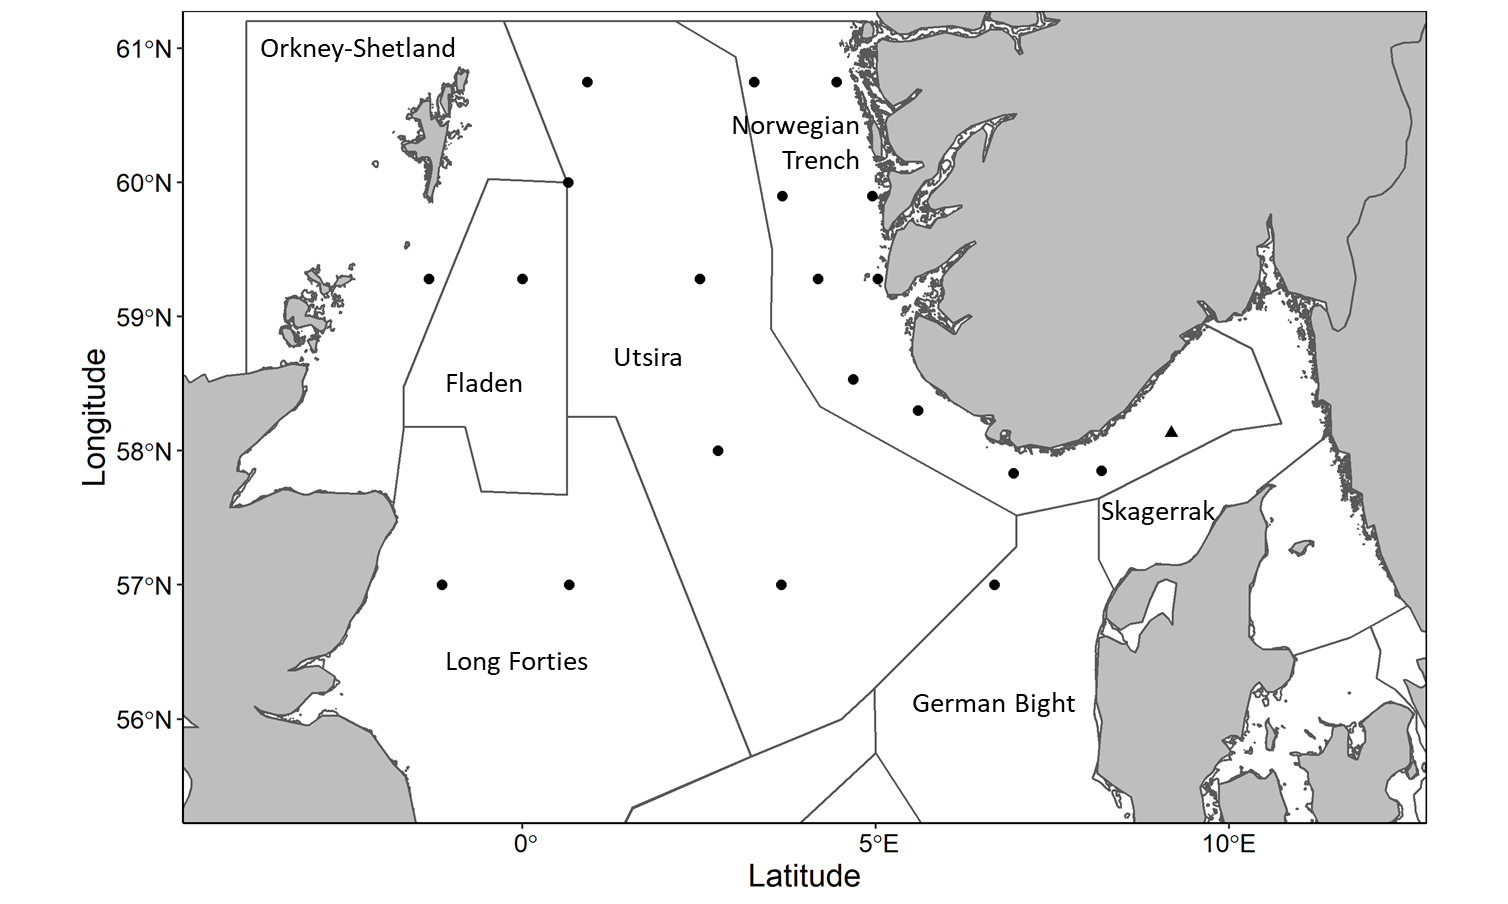 Map showing stations where samples were collected and analyzed for phytoplankton community composition using microscopy. Outlined areas indicate WGINOSE sub-regions. Shape indicates the cruise a sample was collected on, circle: 2022206 ecosystem cruise, triangle: April Torungen-Hirtshals cruise.